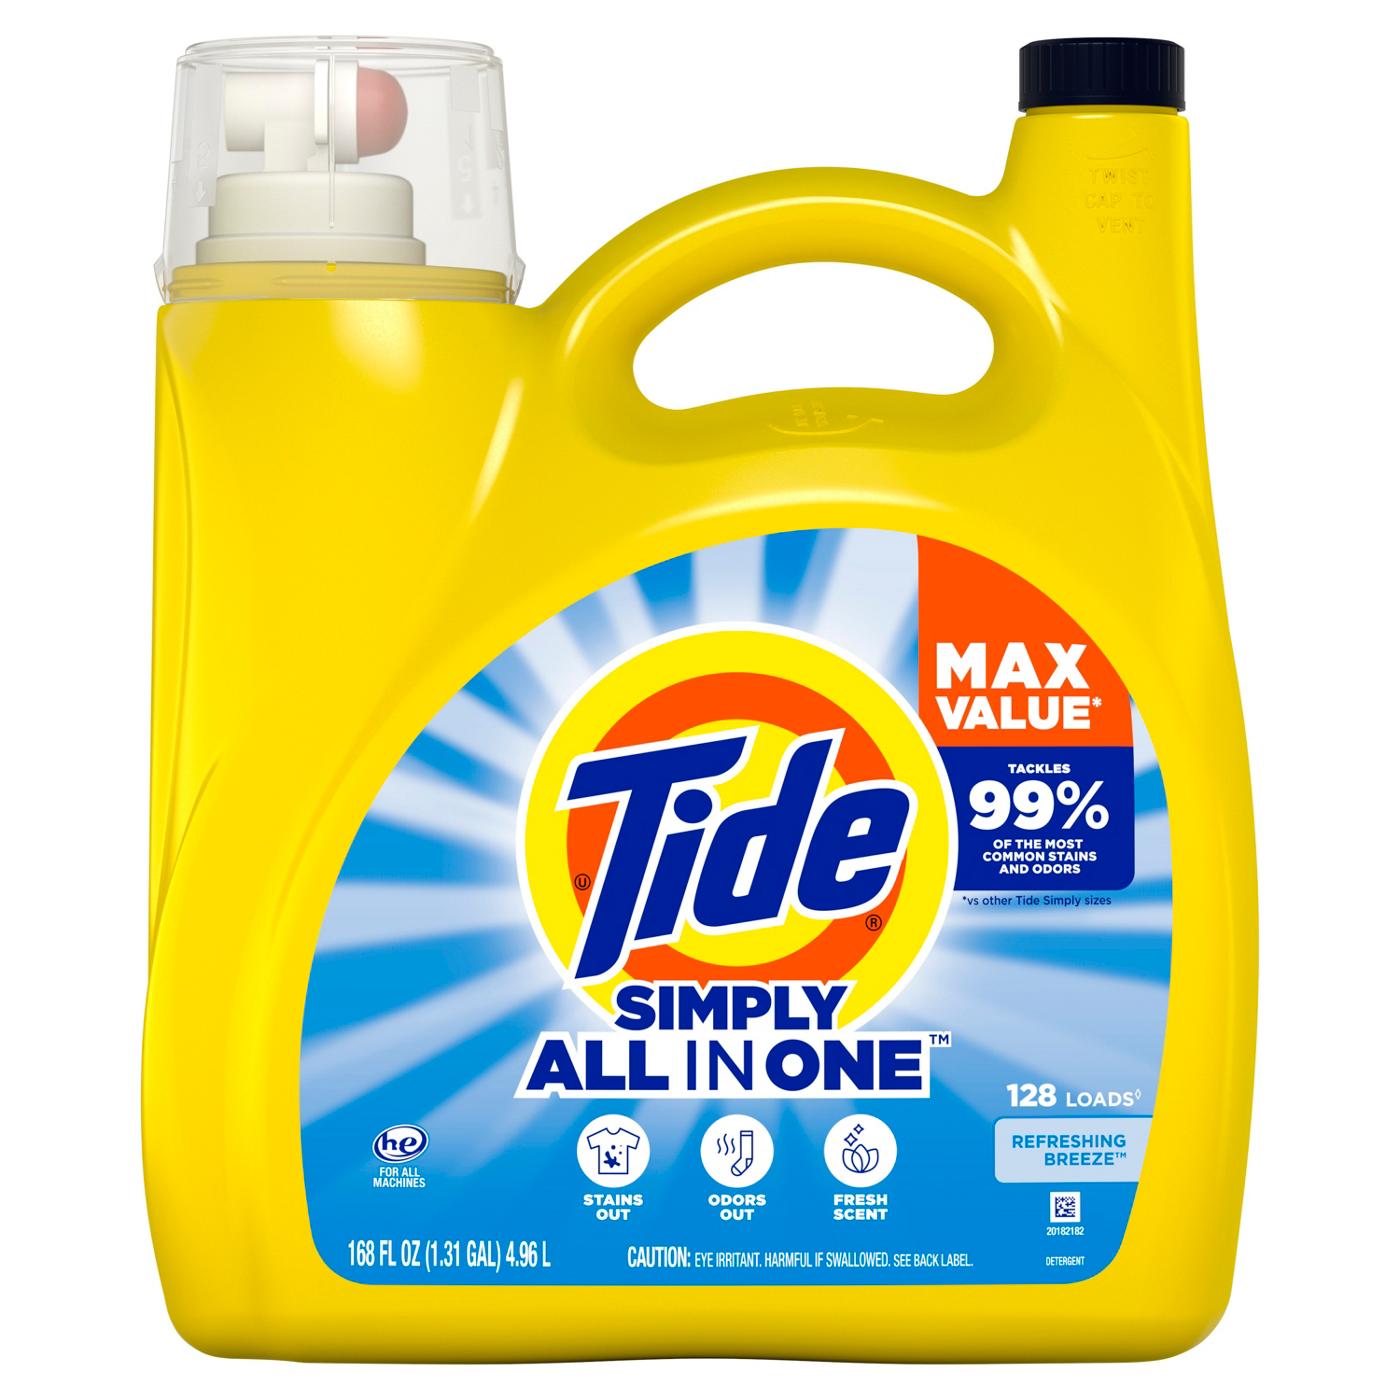 Tide Simply All In One Refreshing Breeze Liquid Laundry Detergent 128 Loads; image 1 of 9